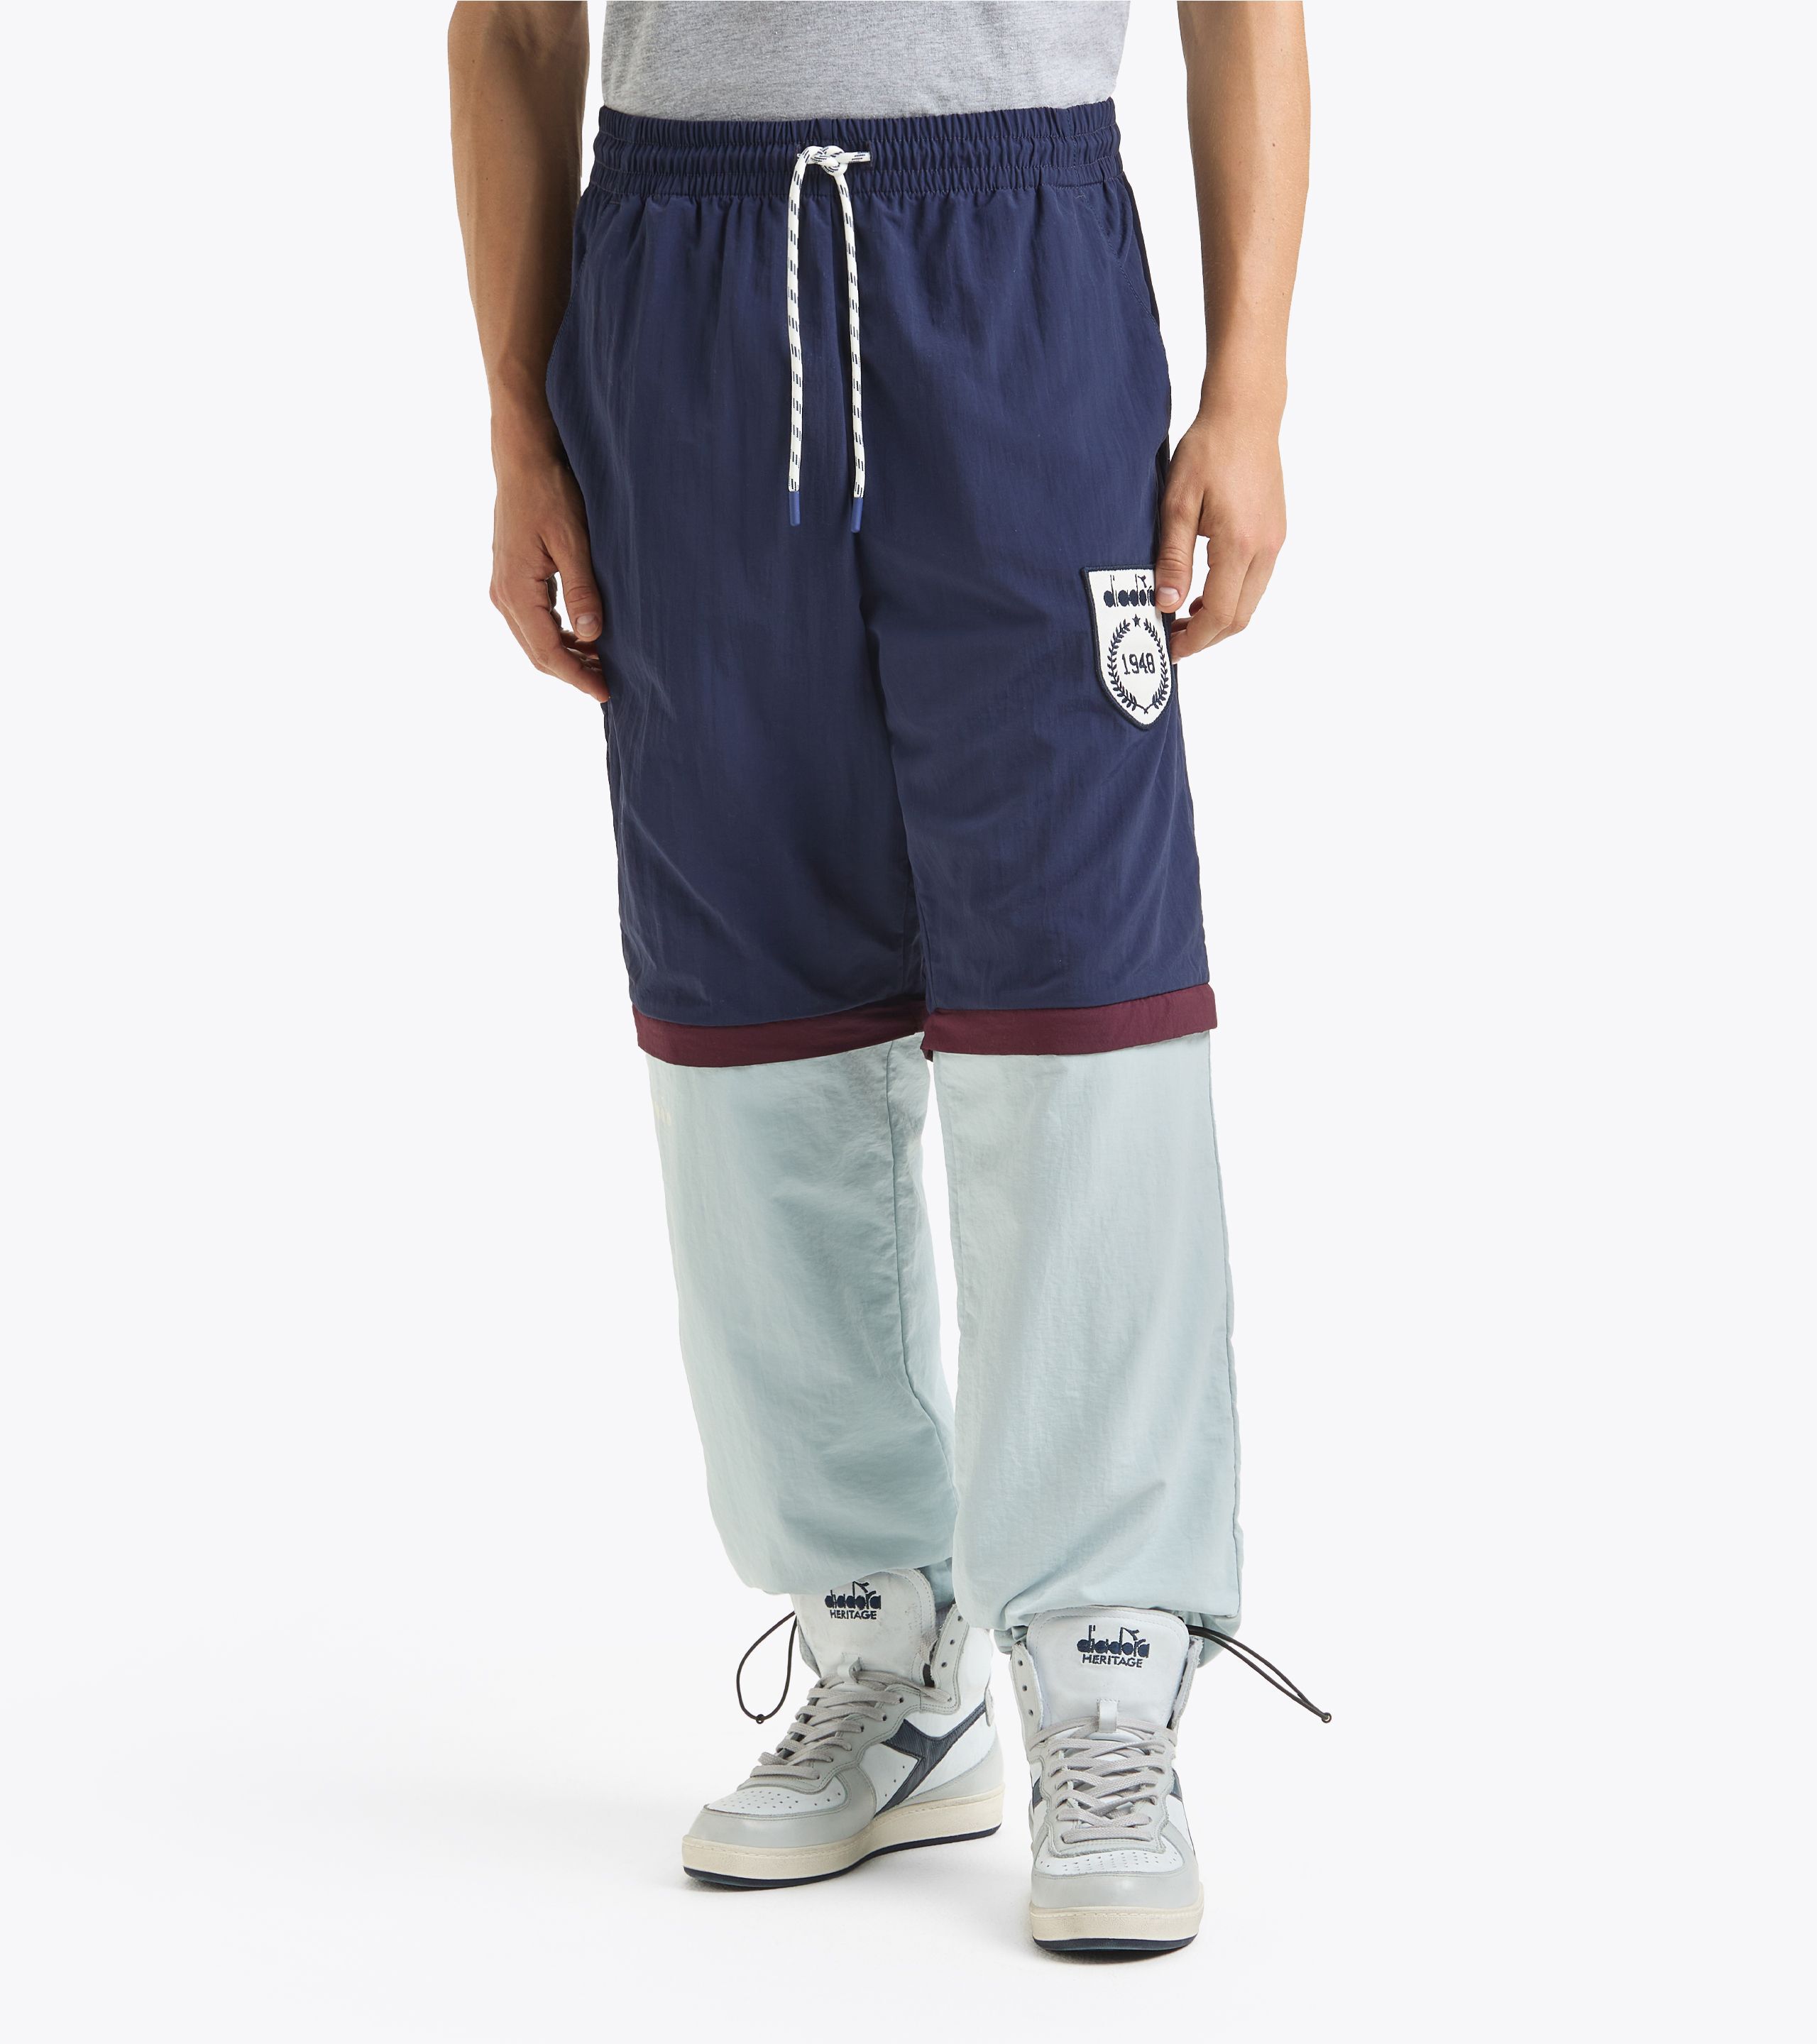 TRACK PANT LEGACY Track Pants - Made in italy - Gender Neutral